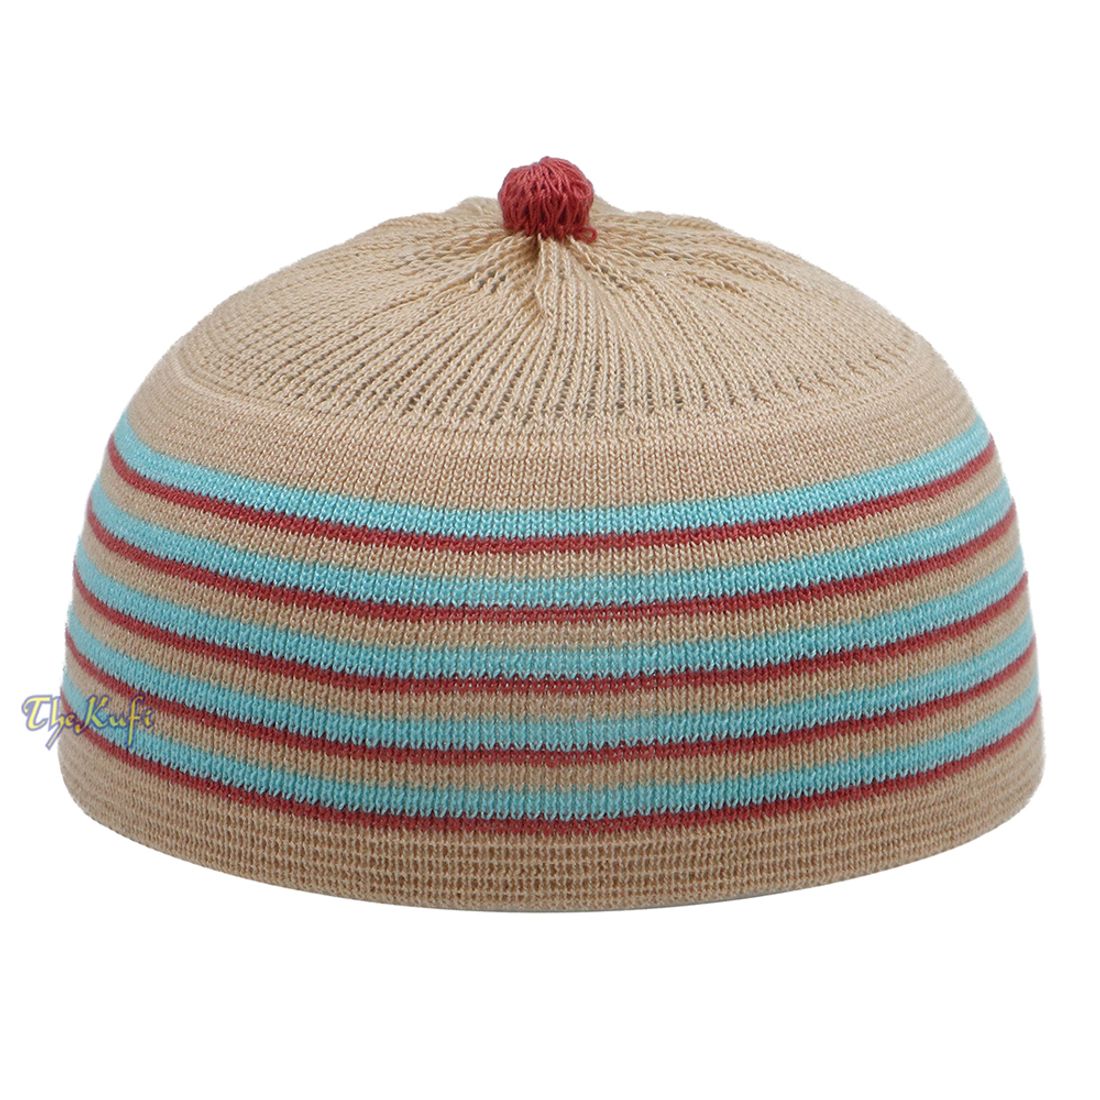 Beige with Turquoise and Maroon Lines Baby or Infant Kufi Pompom Stretchable Beanie